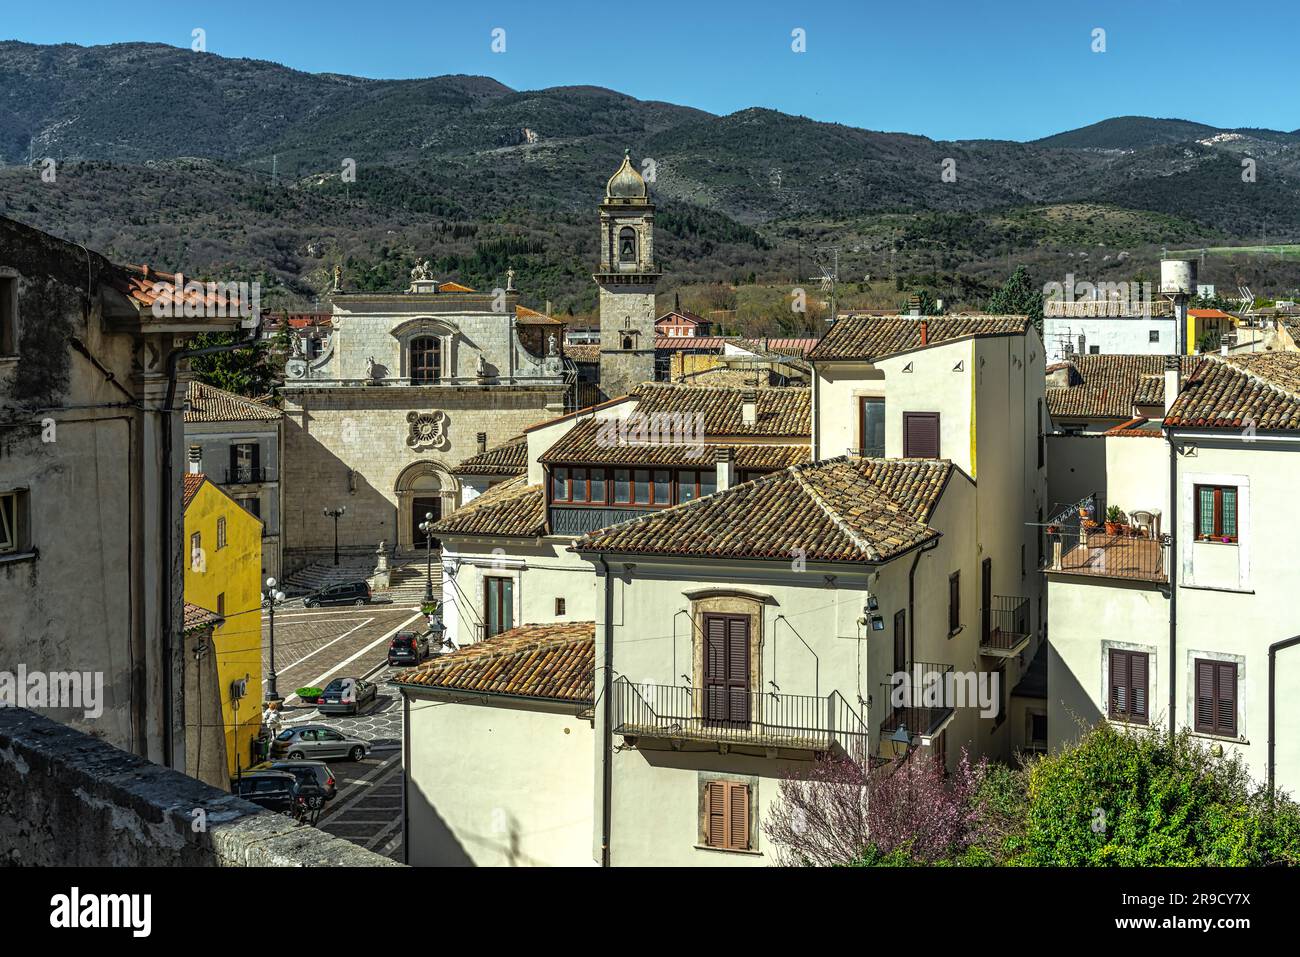 Glimpses from above of the historical center of the medieval town of Popoli. Popoli, Pescara province, Abruzzo, Italy, Europe Stock Photo